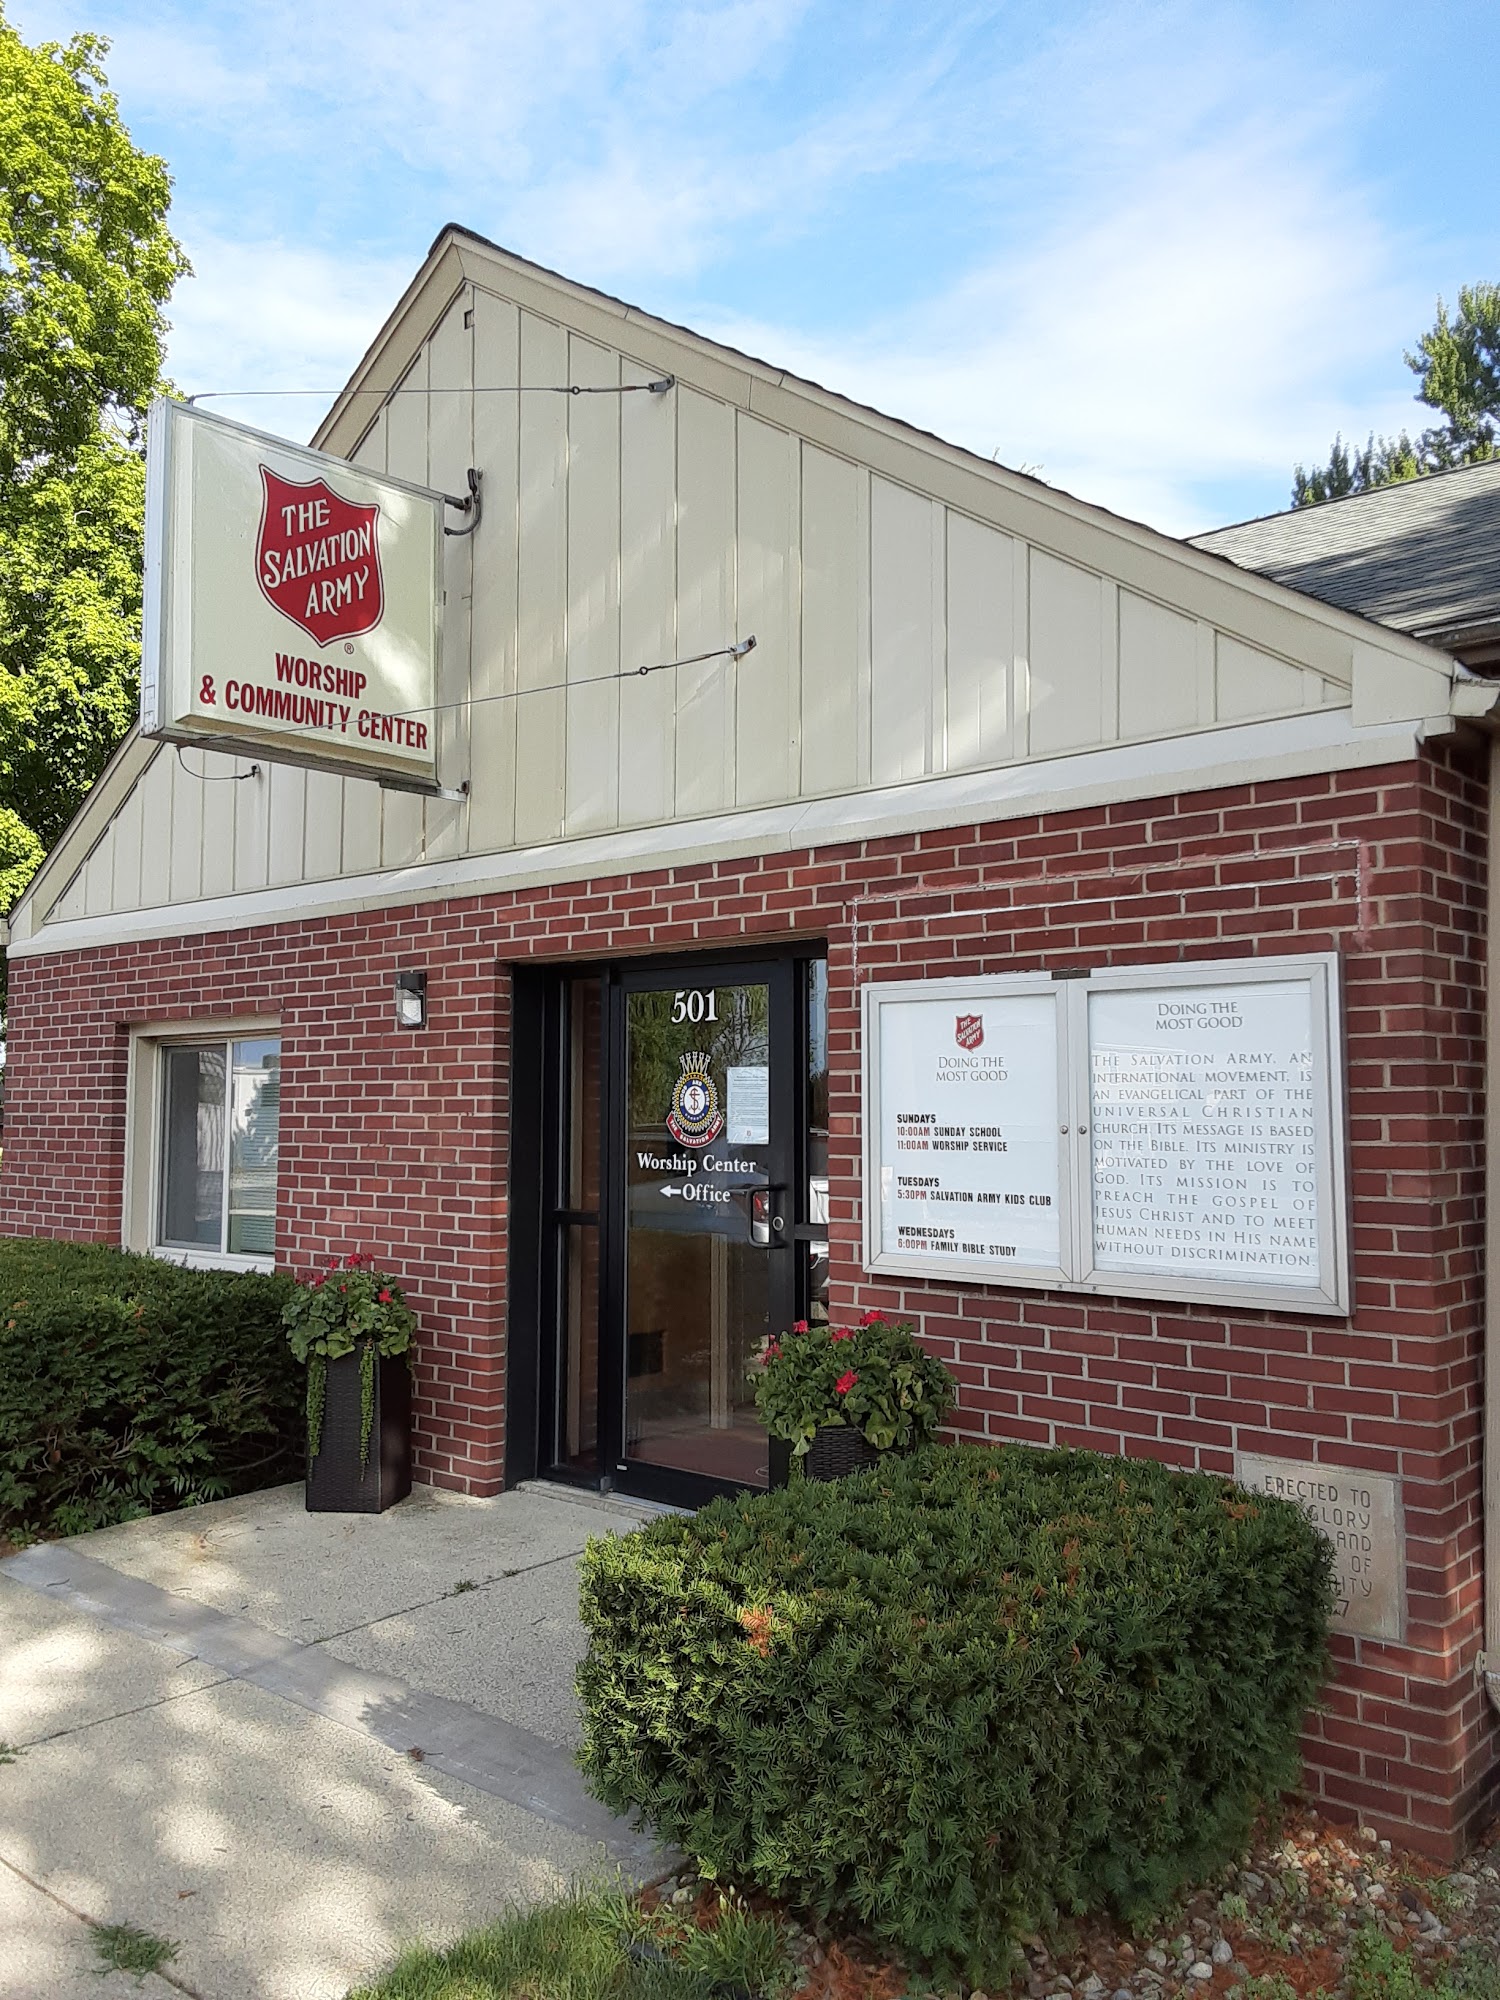 The Salvation Army - Worship & Community Center